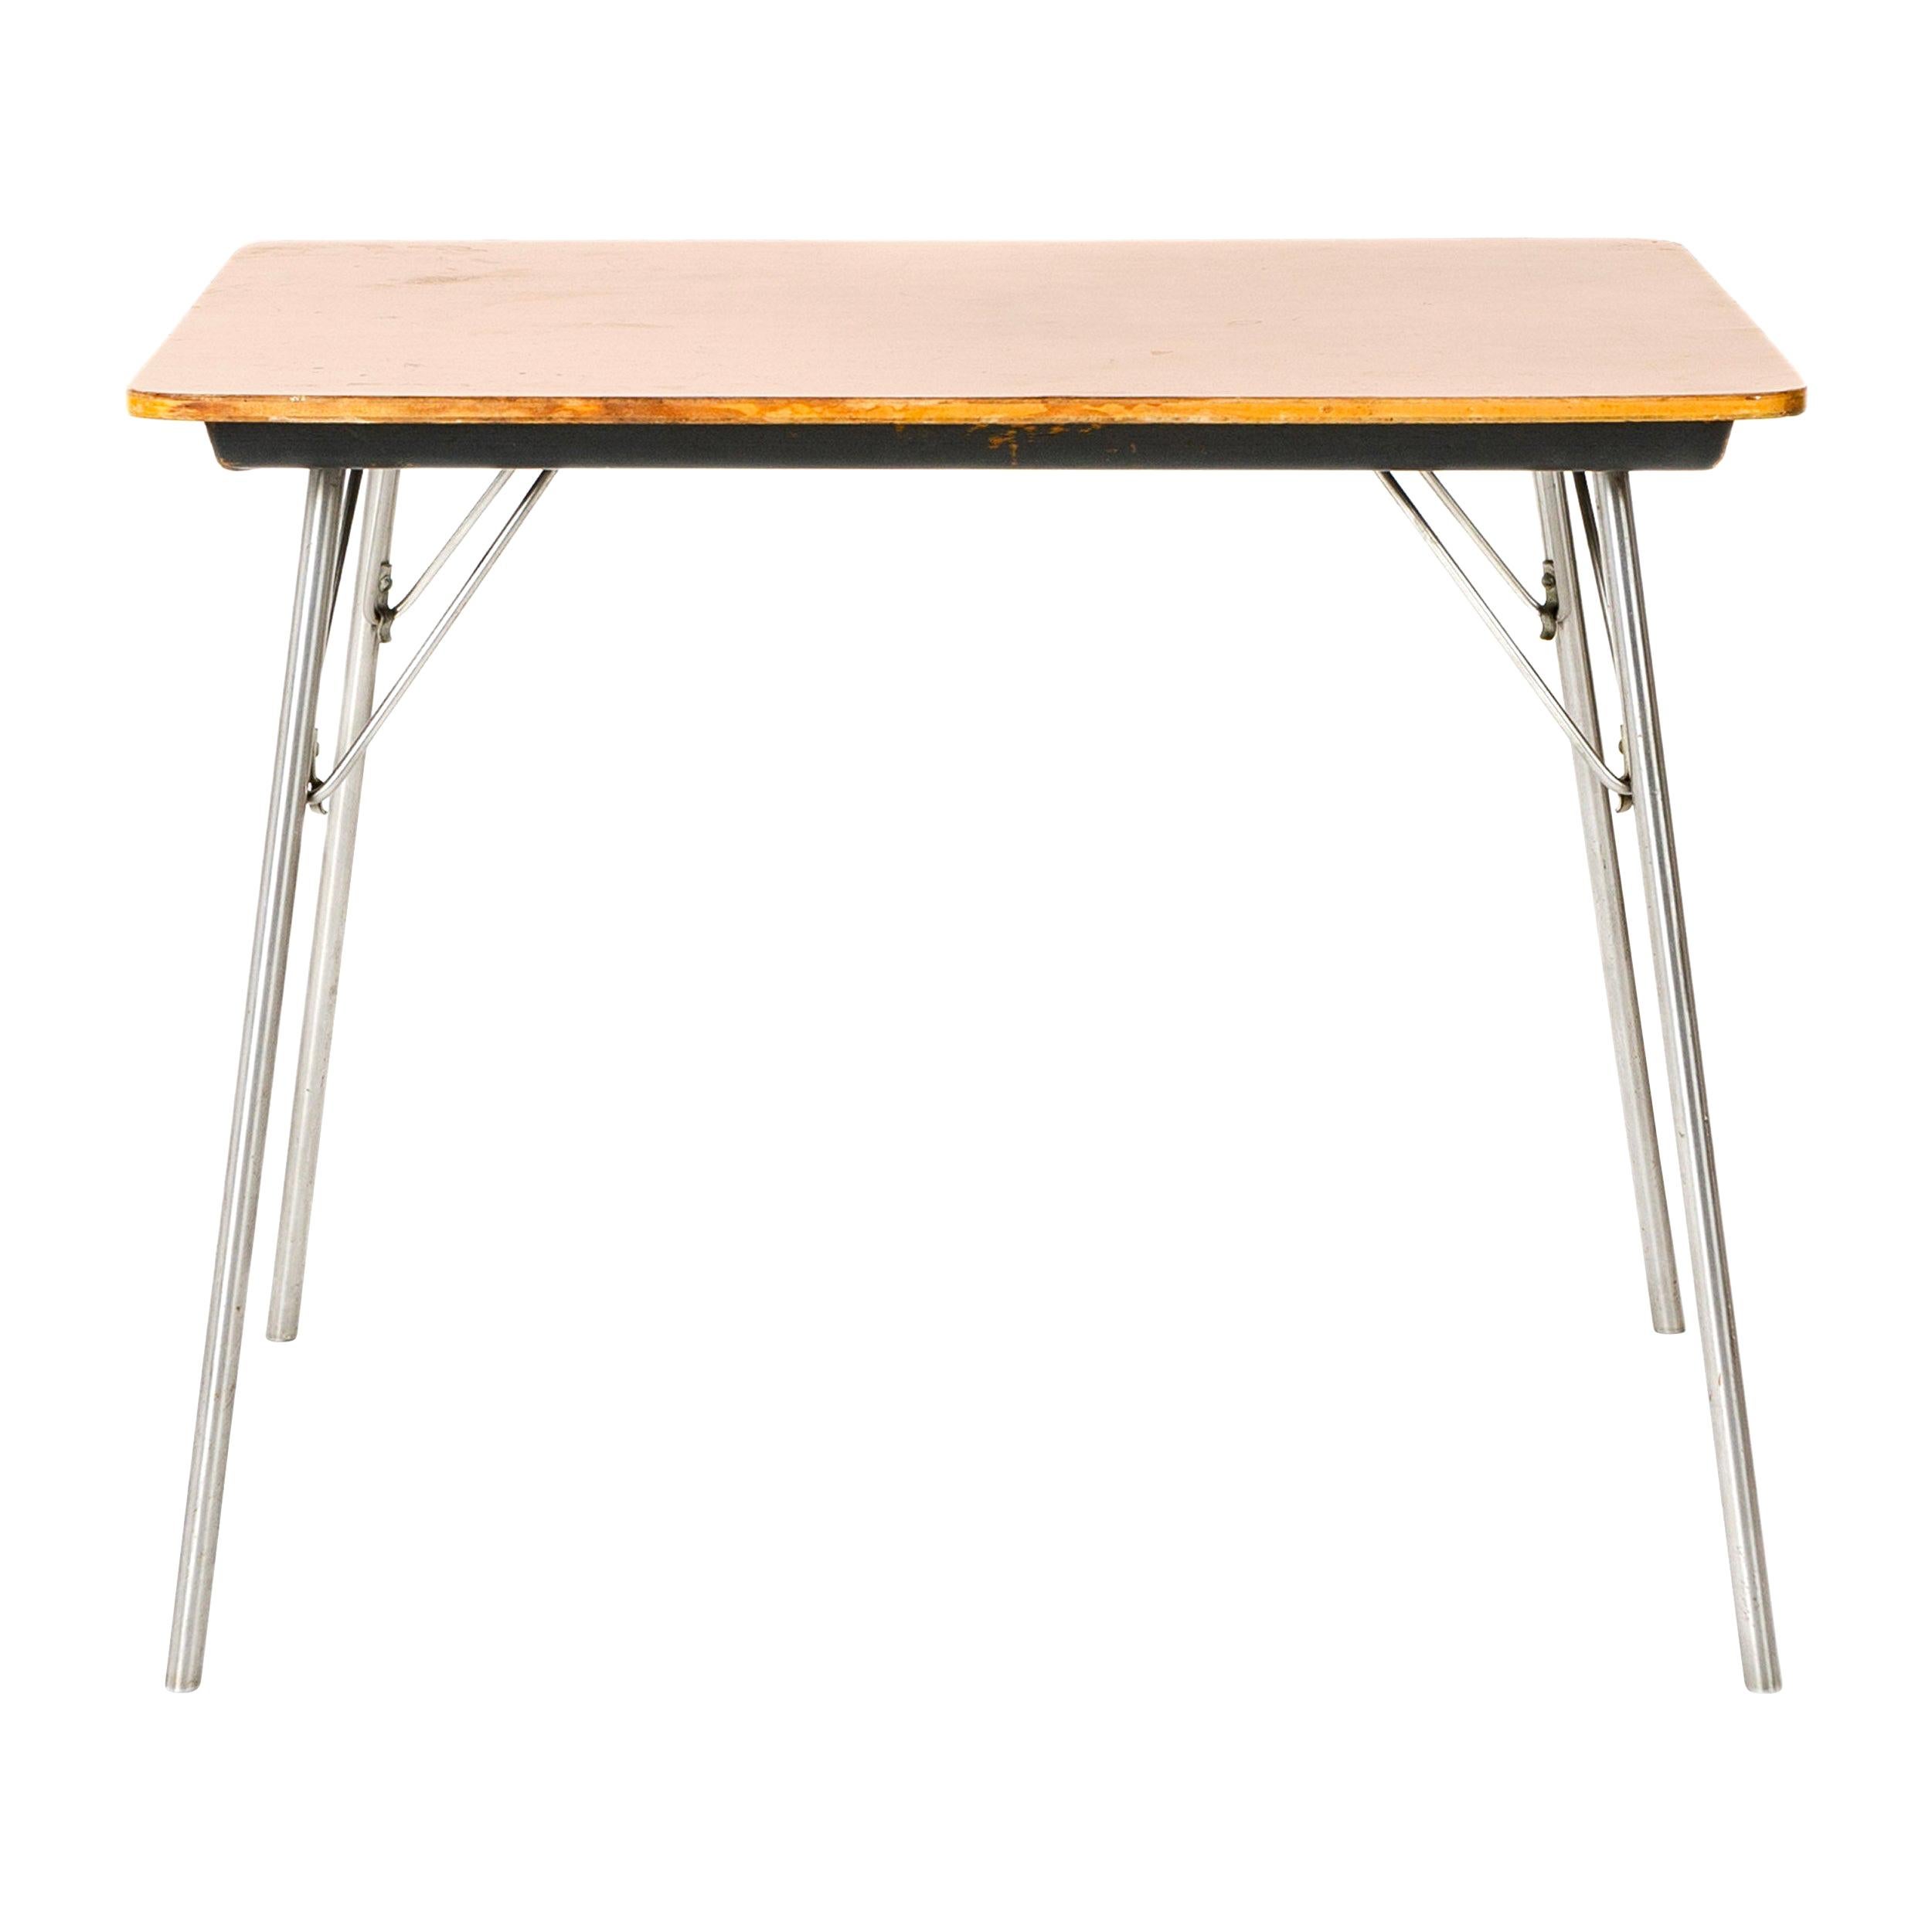 1950s IT Folding Table by Charles and Ray Eames for Herman Miller For Sale